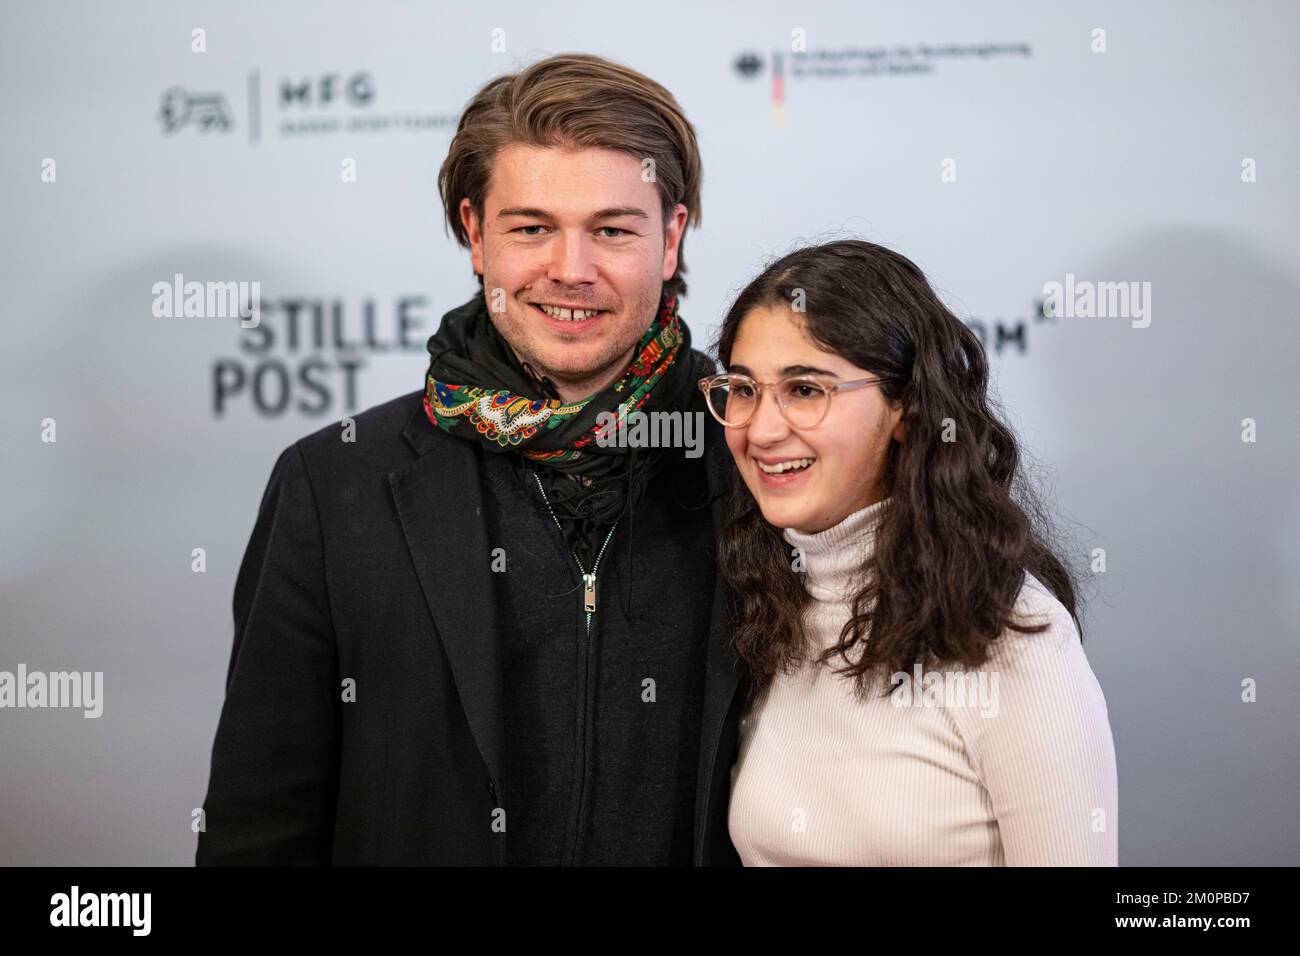 Berlin, Germany. 07th Dec, 2022. Florian Hoffmann, director, and Melda Kanbak, actress, come to the screening of 'Stille Post' and the subsequent panel discussion 'Krieg der Bilder' at the Volksbühne Berlin. On the occasion of the film 'Stille Post,' journalists Moreno, Rojkov and Pesmen will discuss media reporting in times of fake news and image manipulation. Credit: Fabian Sommer/dpa/Alamy Live News Stock Photo